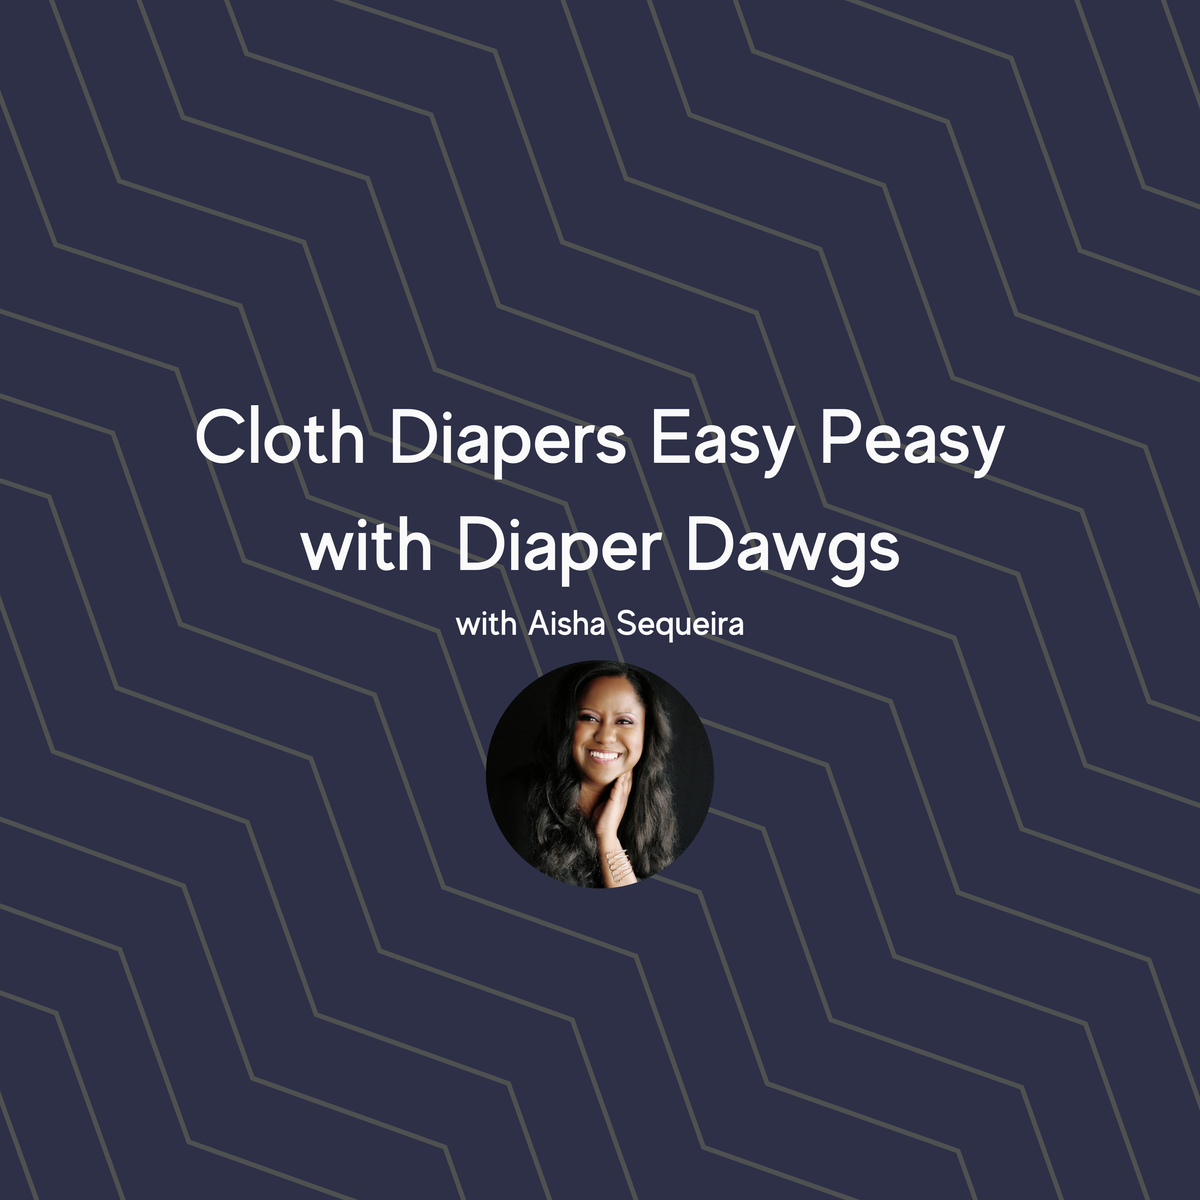 Cloth Diapers Easy Peasy with Diaper Dawgs with Aisha Sequeira